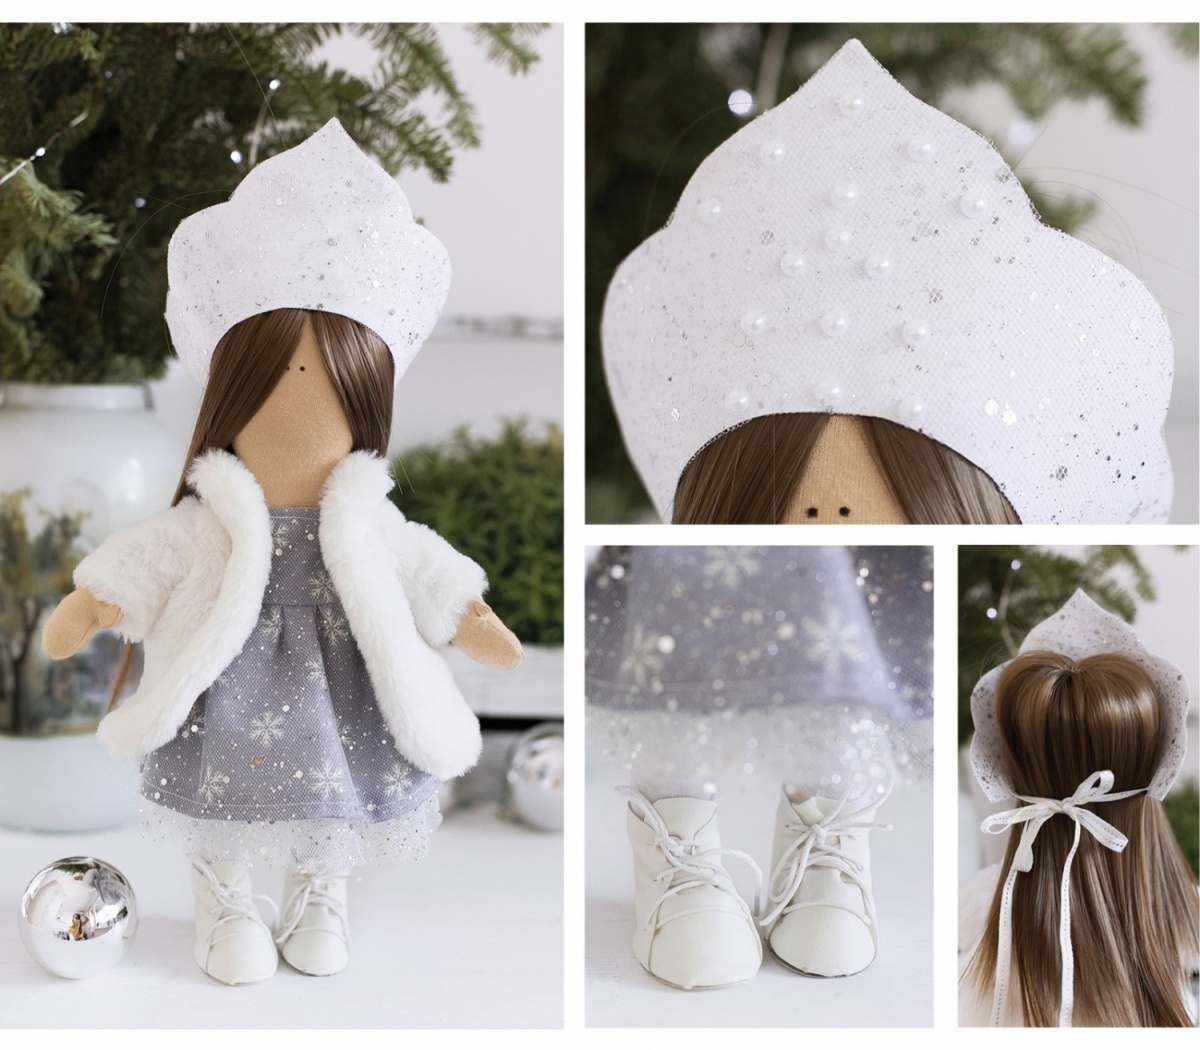 Snow Maiden Interior Doll Sewing Kit фото 2